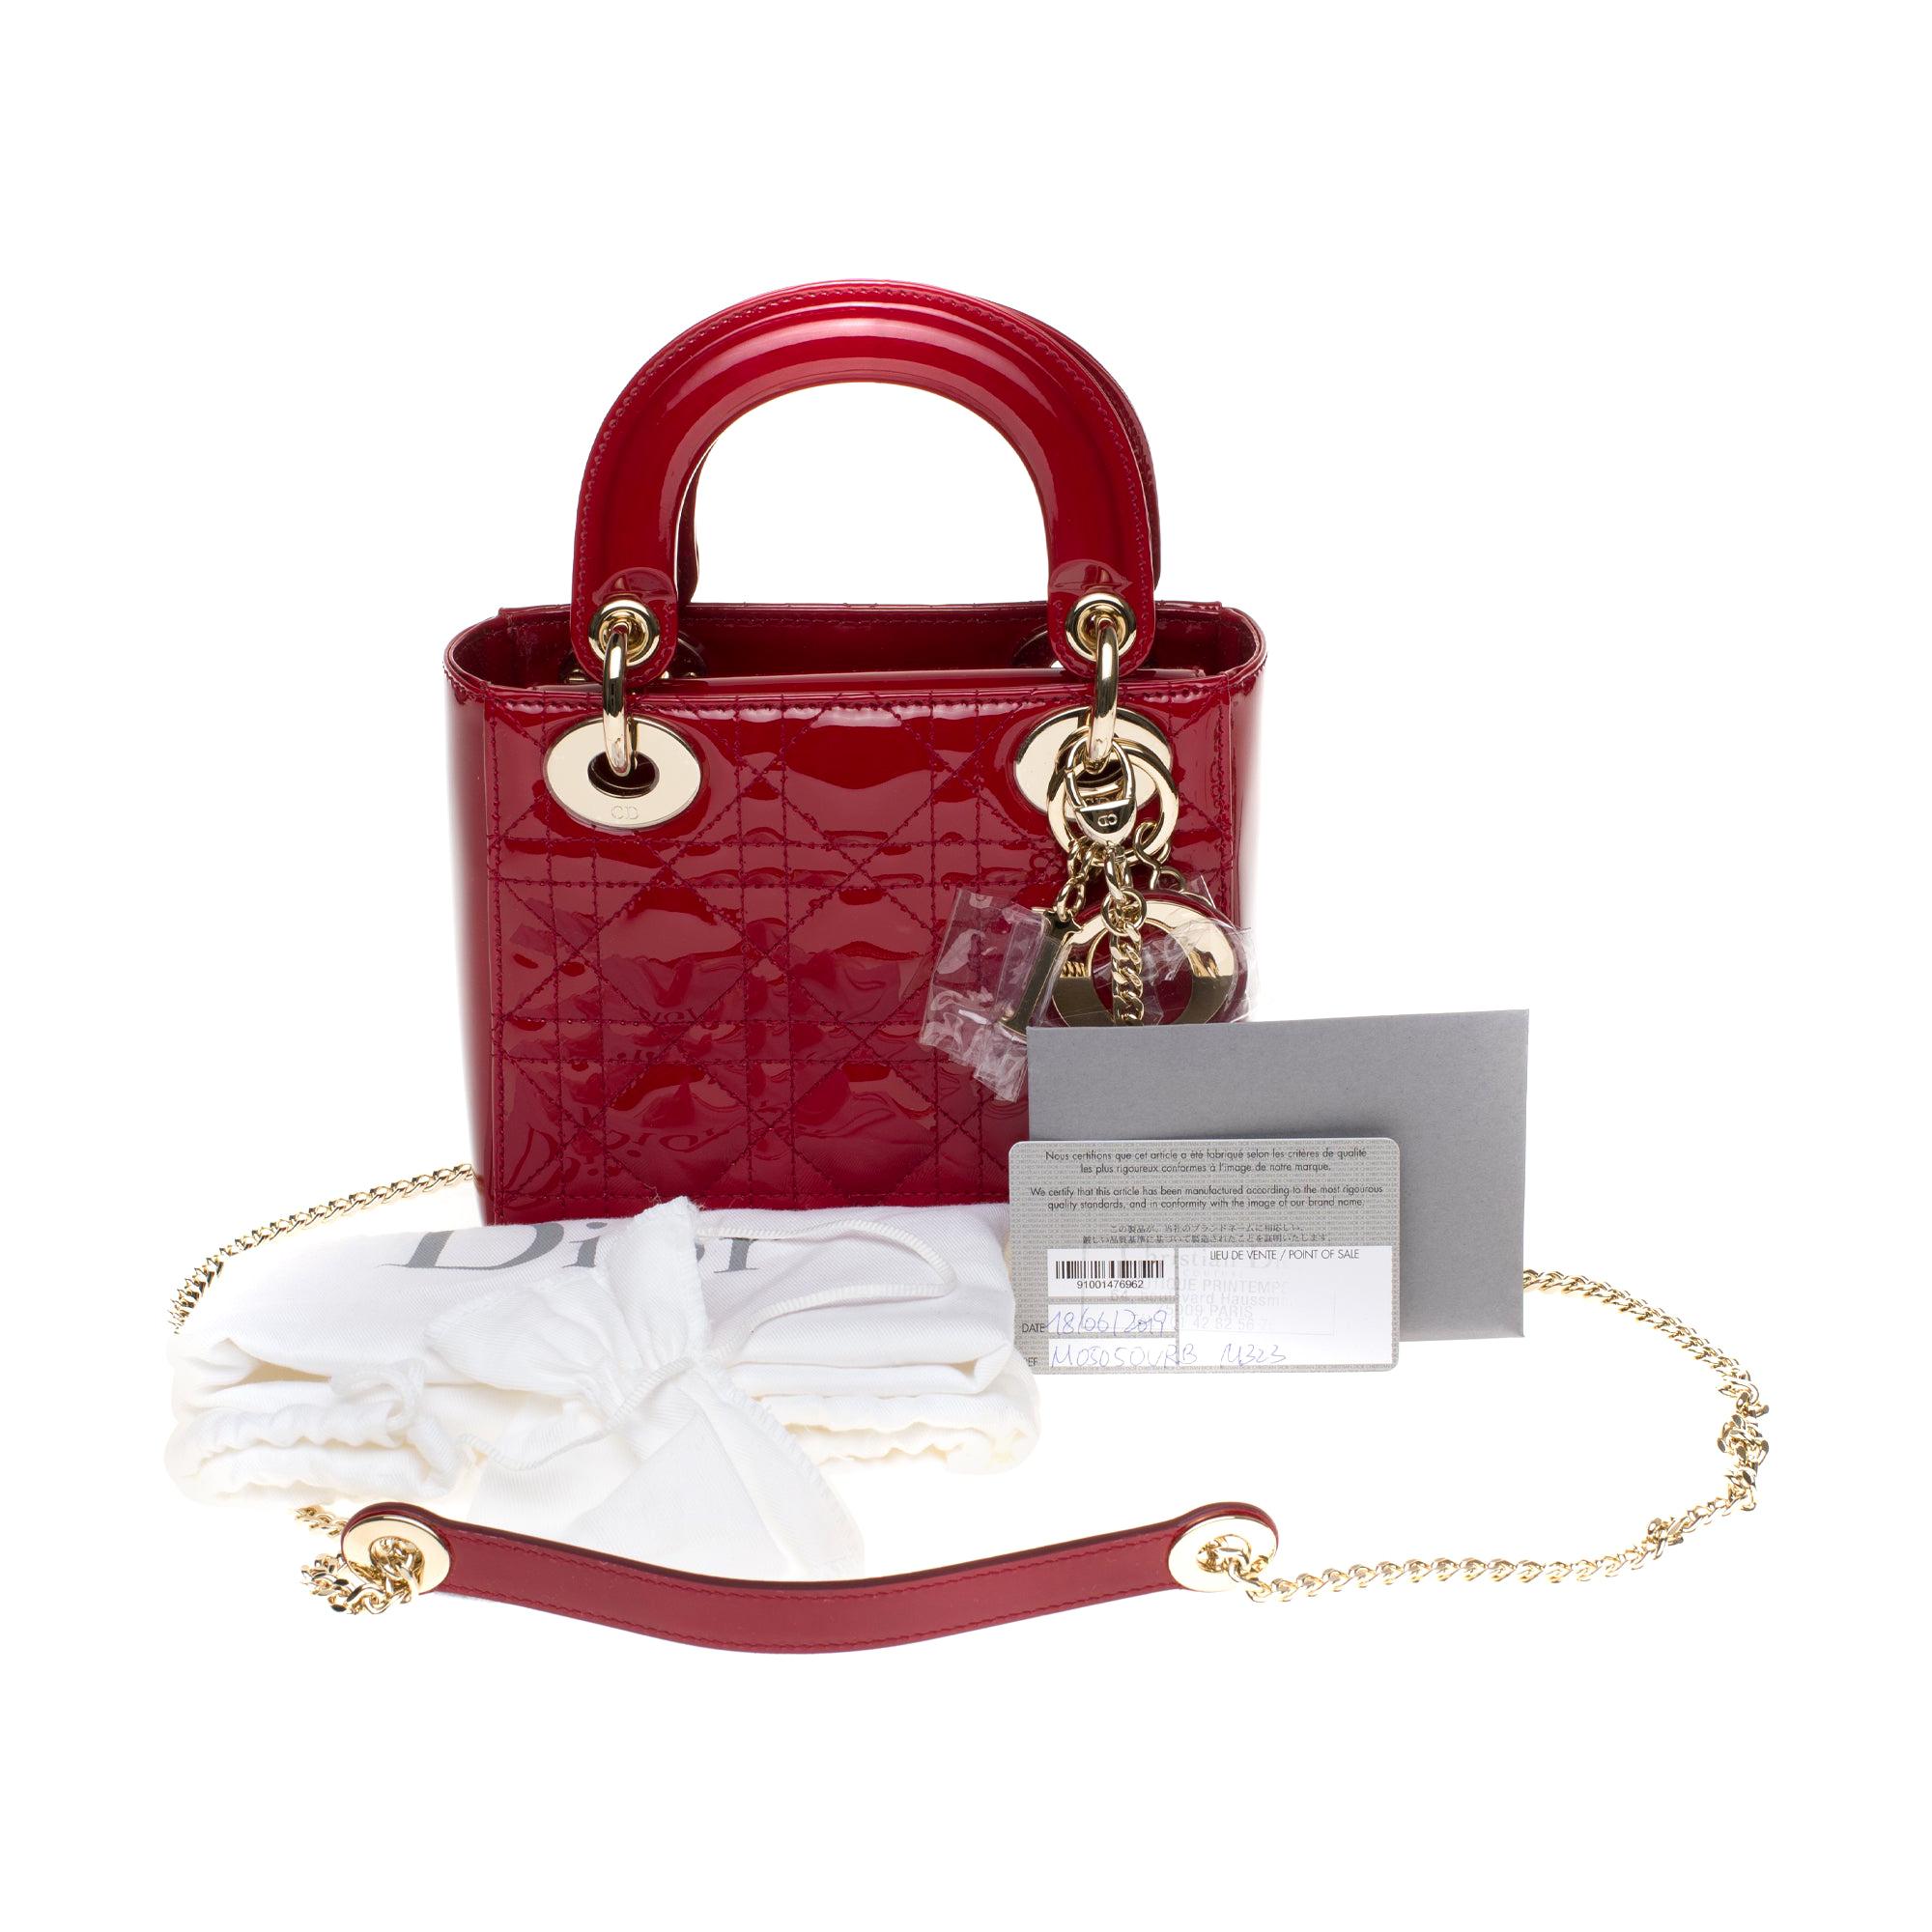 Brand new - Mini Lady Dior handbag with strap in cherry red patent leather